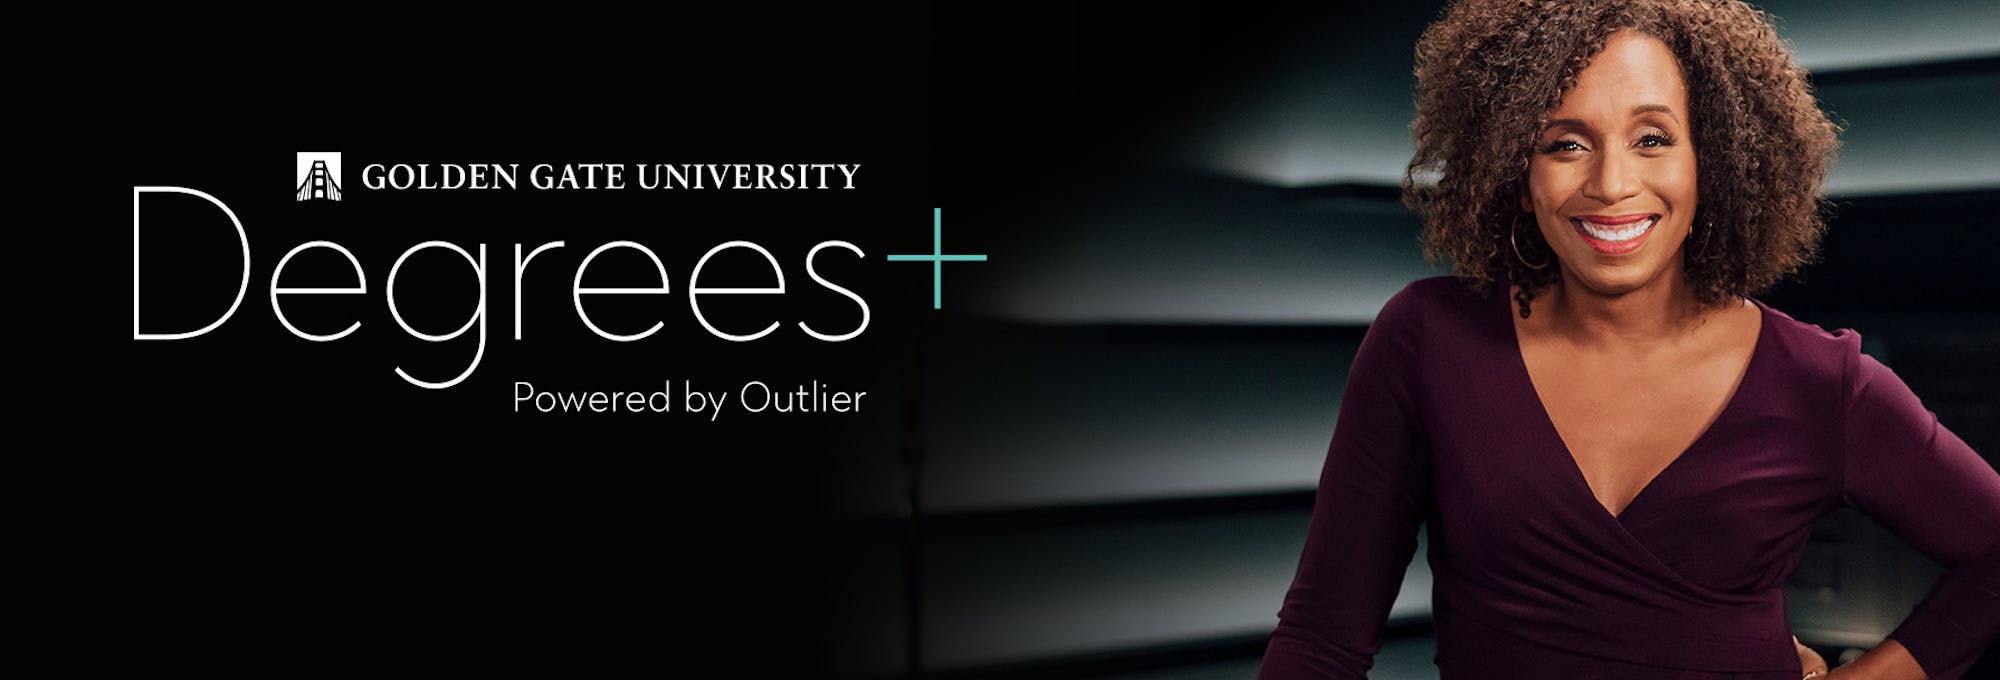 Golden Gate University Degrees+ Powered by Outlier